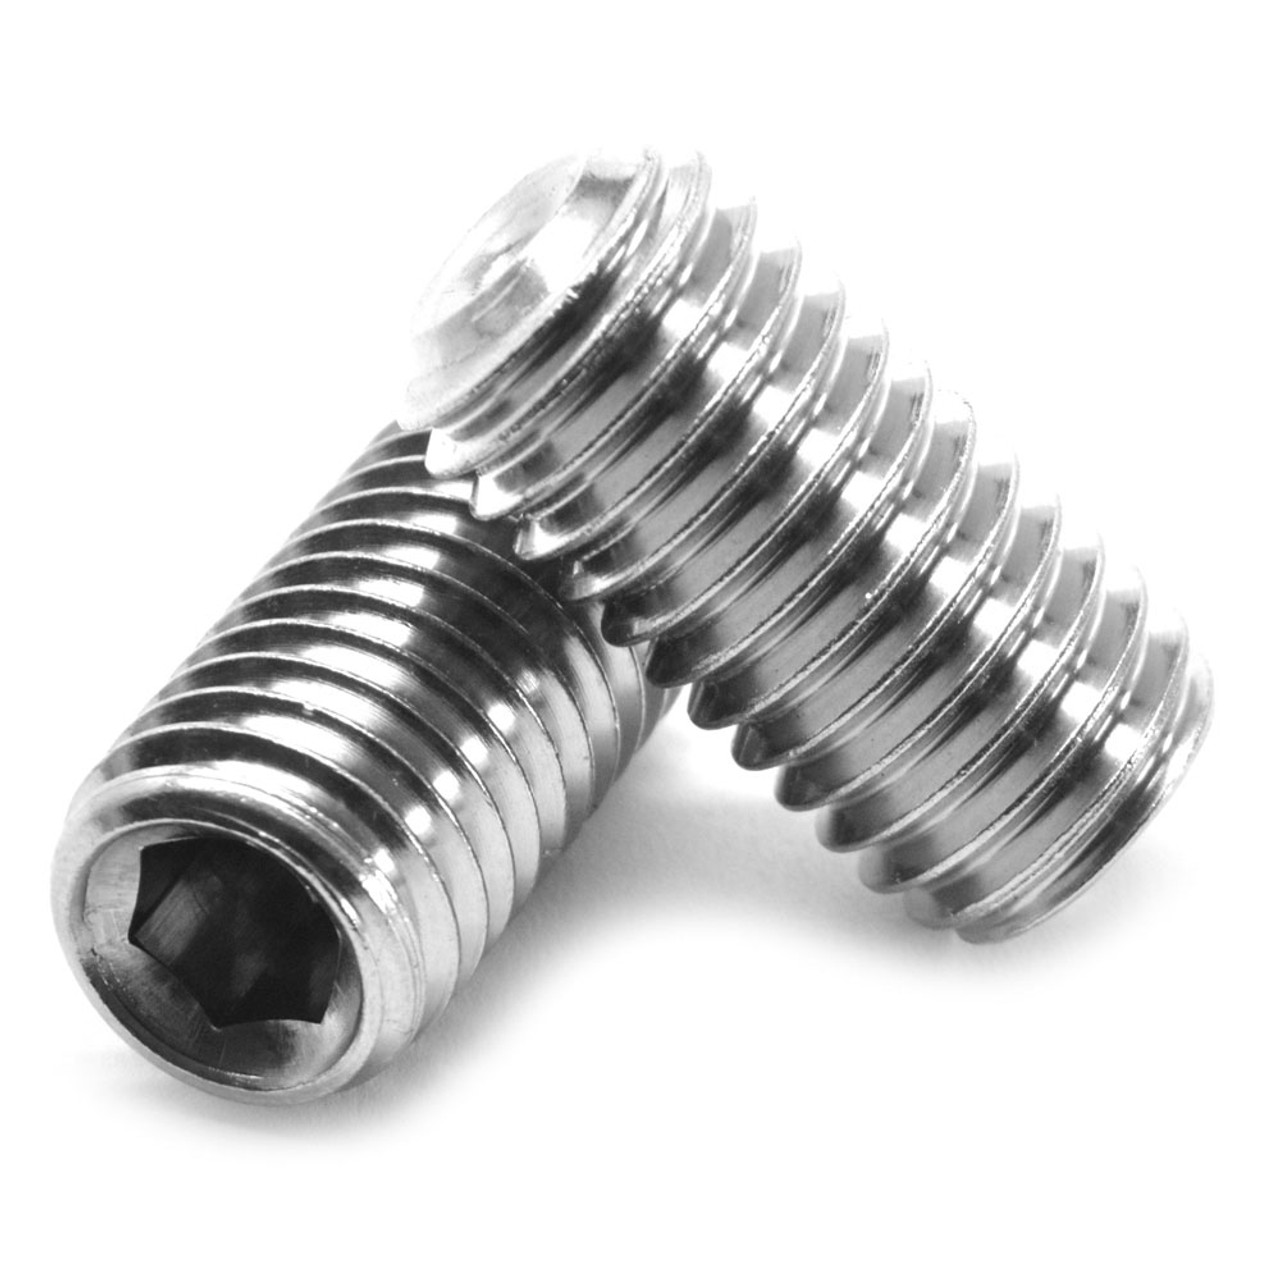 #0-80 x 1/4" Fine Thread Socket Set Screw Cup Point Stainless Steel 18-8